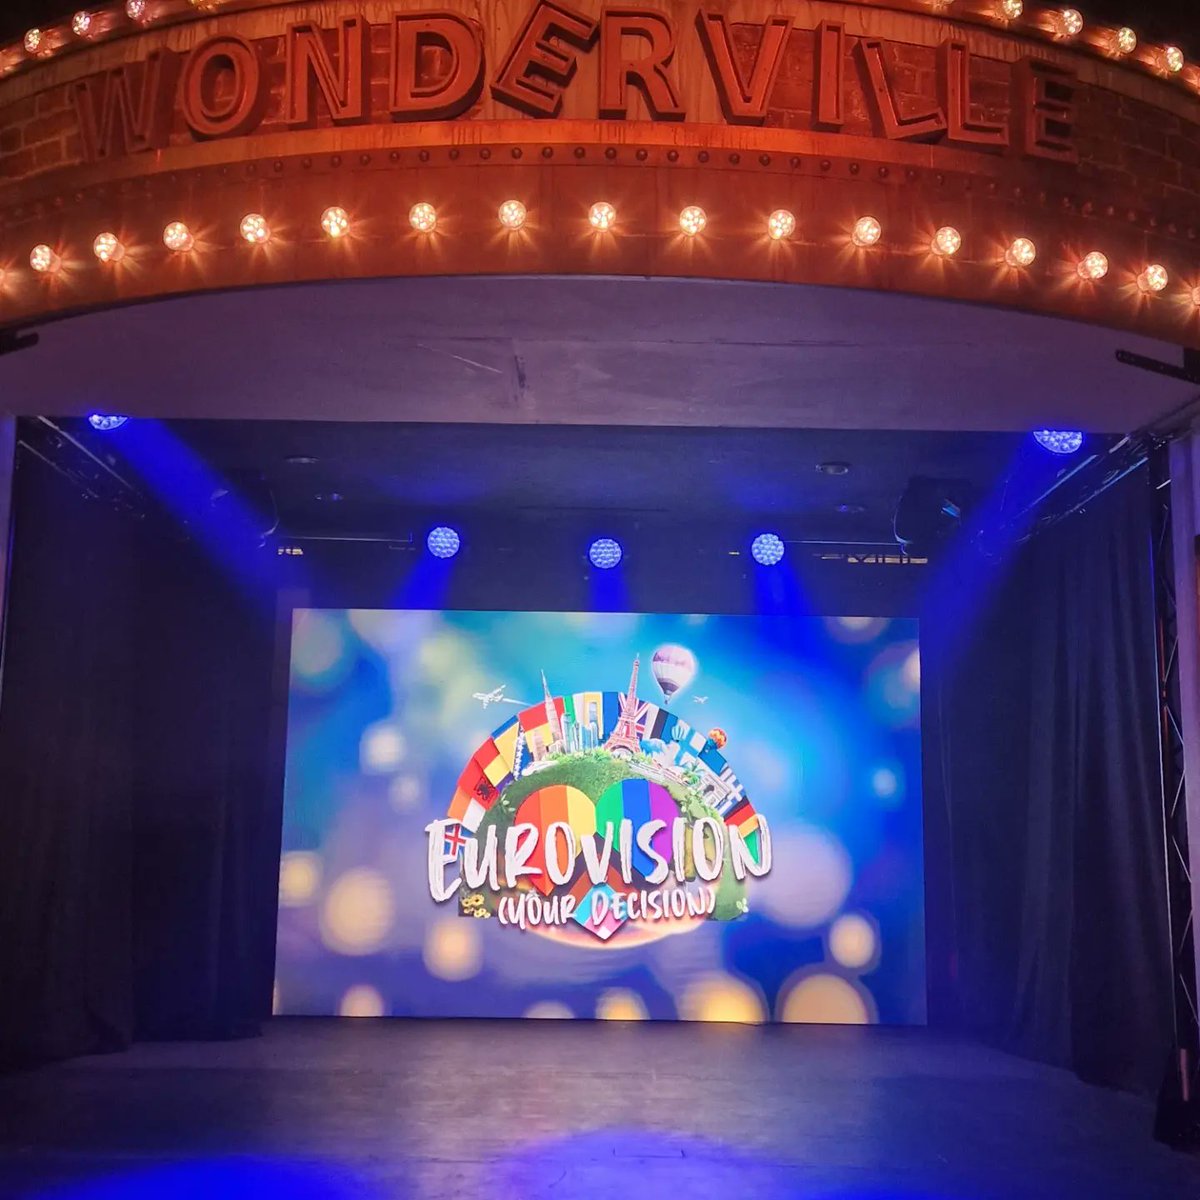 Today's viewing - at @WondervilleLive for @abovethestag Eurovision: Your Decision with @ldshicks - the first of 2 Eurovision themed shows for me this week. Look out for my review tomorrow.